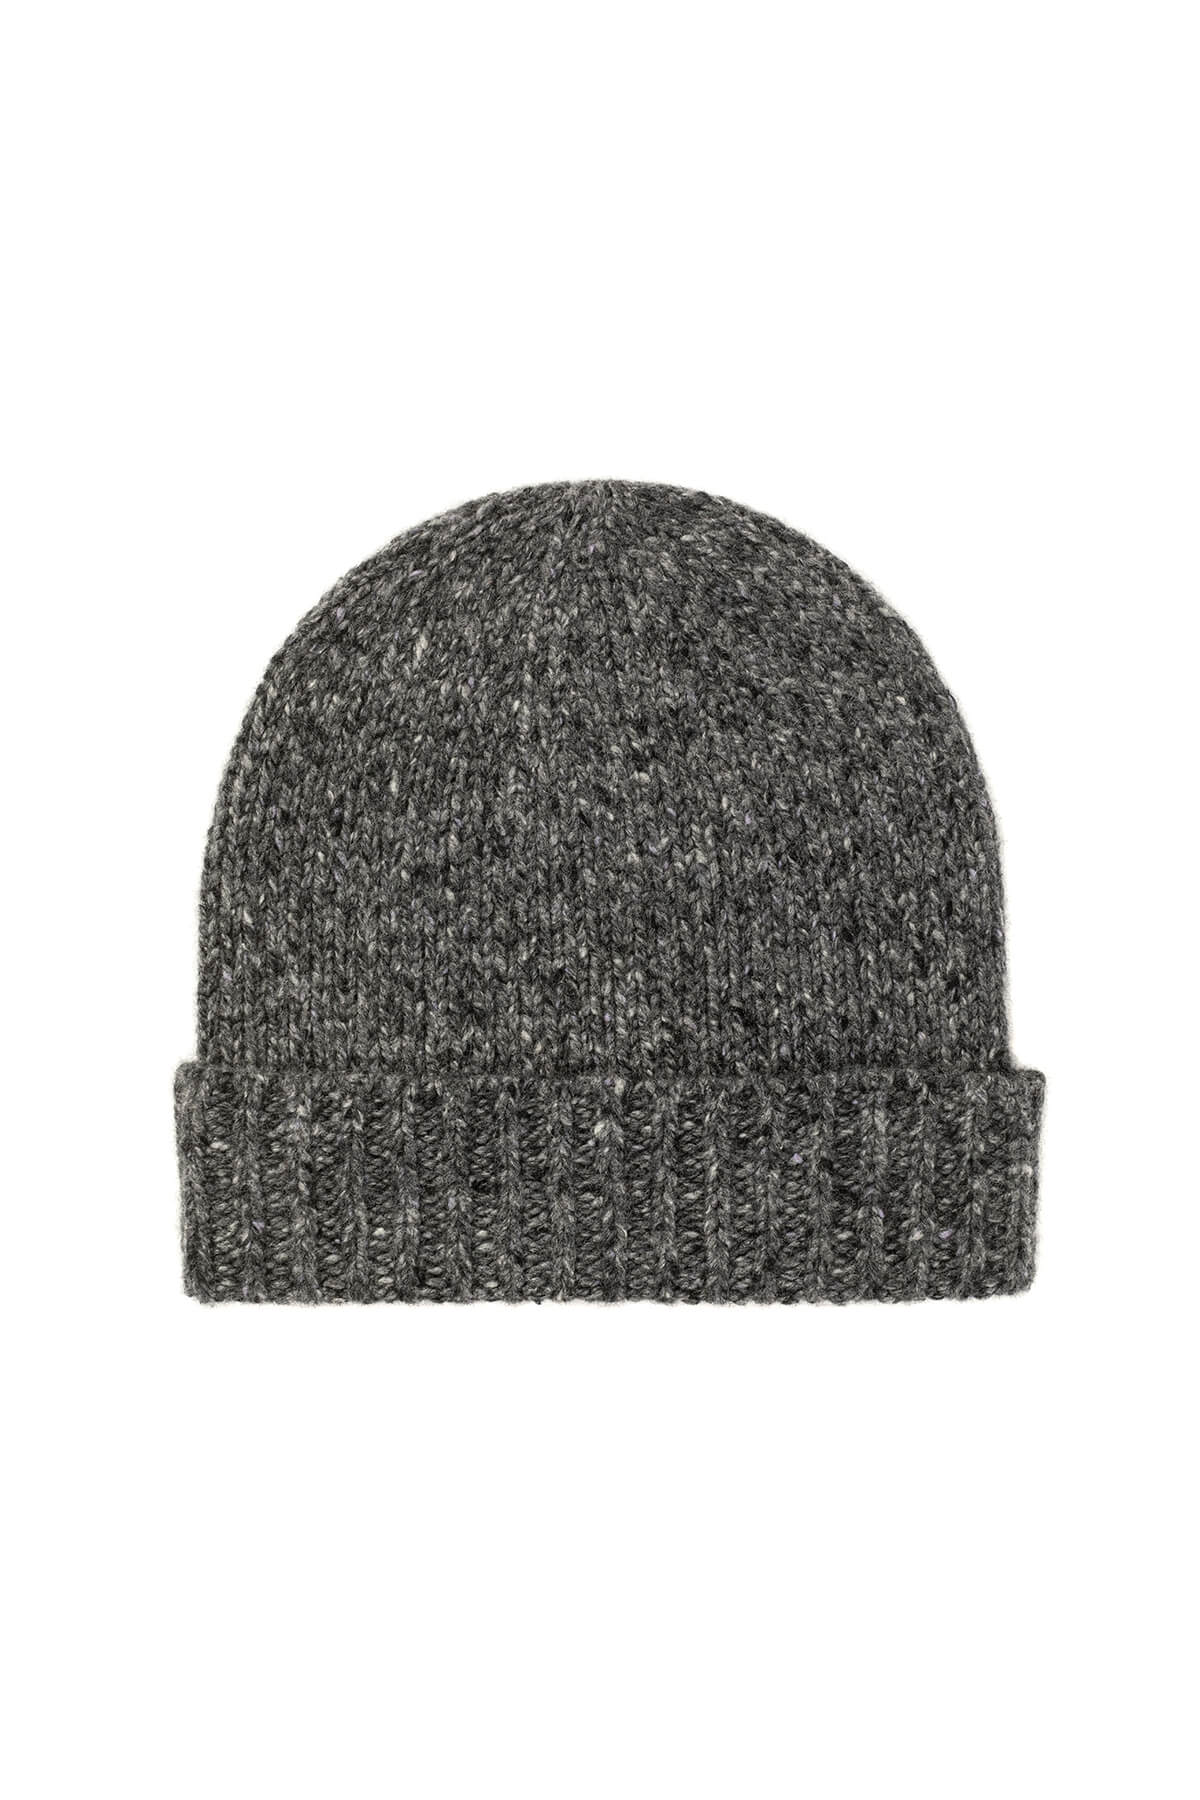 Johnstons of Elgin’s Mid Grey Cashmere Donegal Beanie on a white background HAC03247HA7161